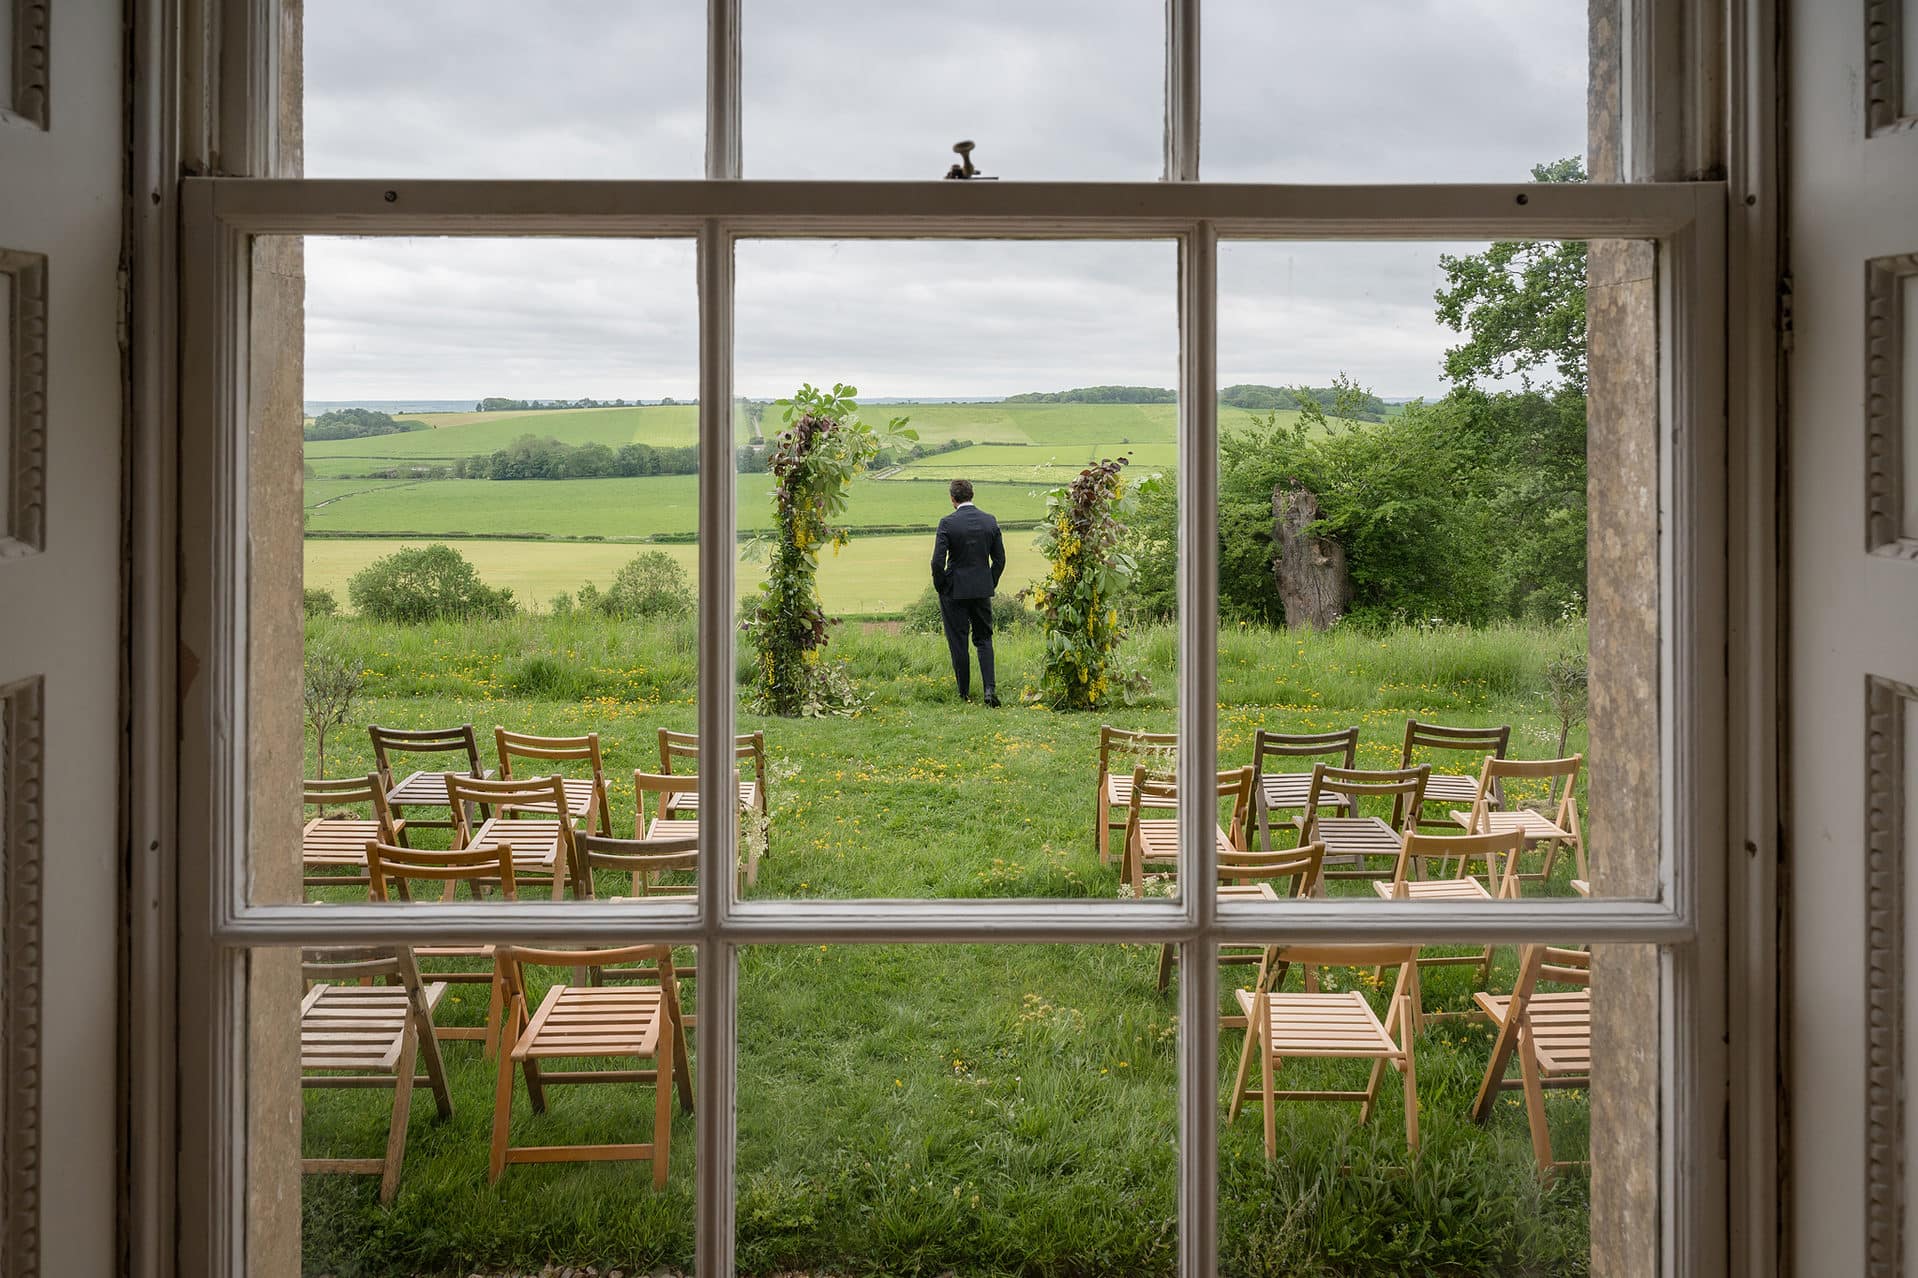 Shot through a window of a groom standing at the front of the outdoor ceremony area looking out over the Leicestershire countryside